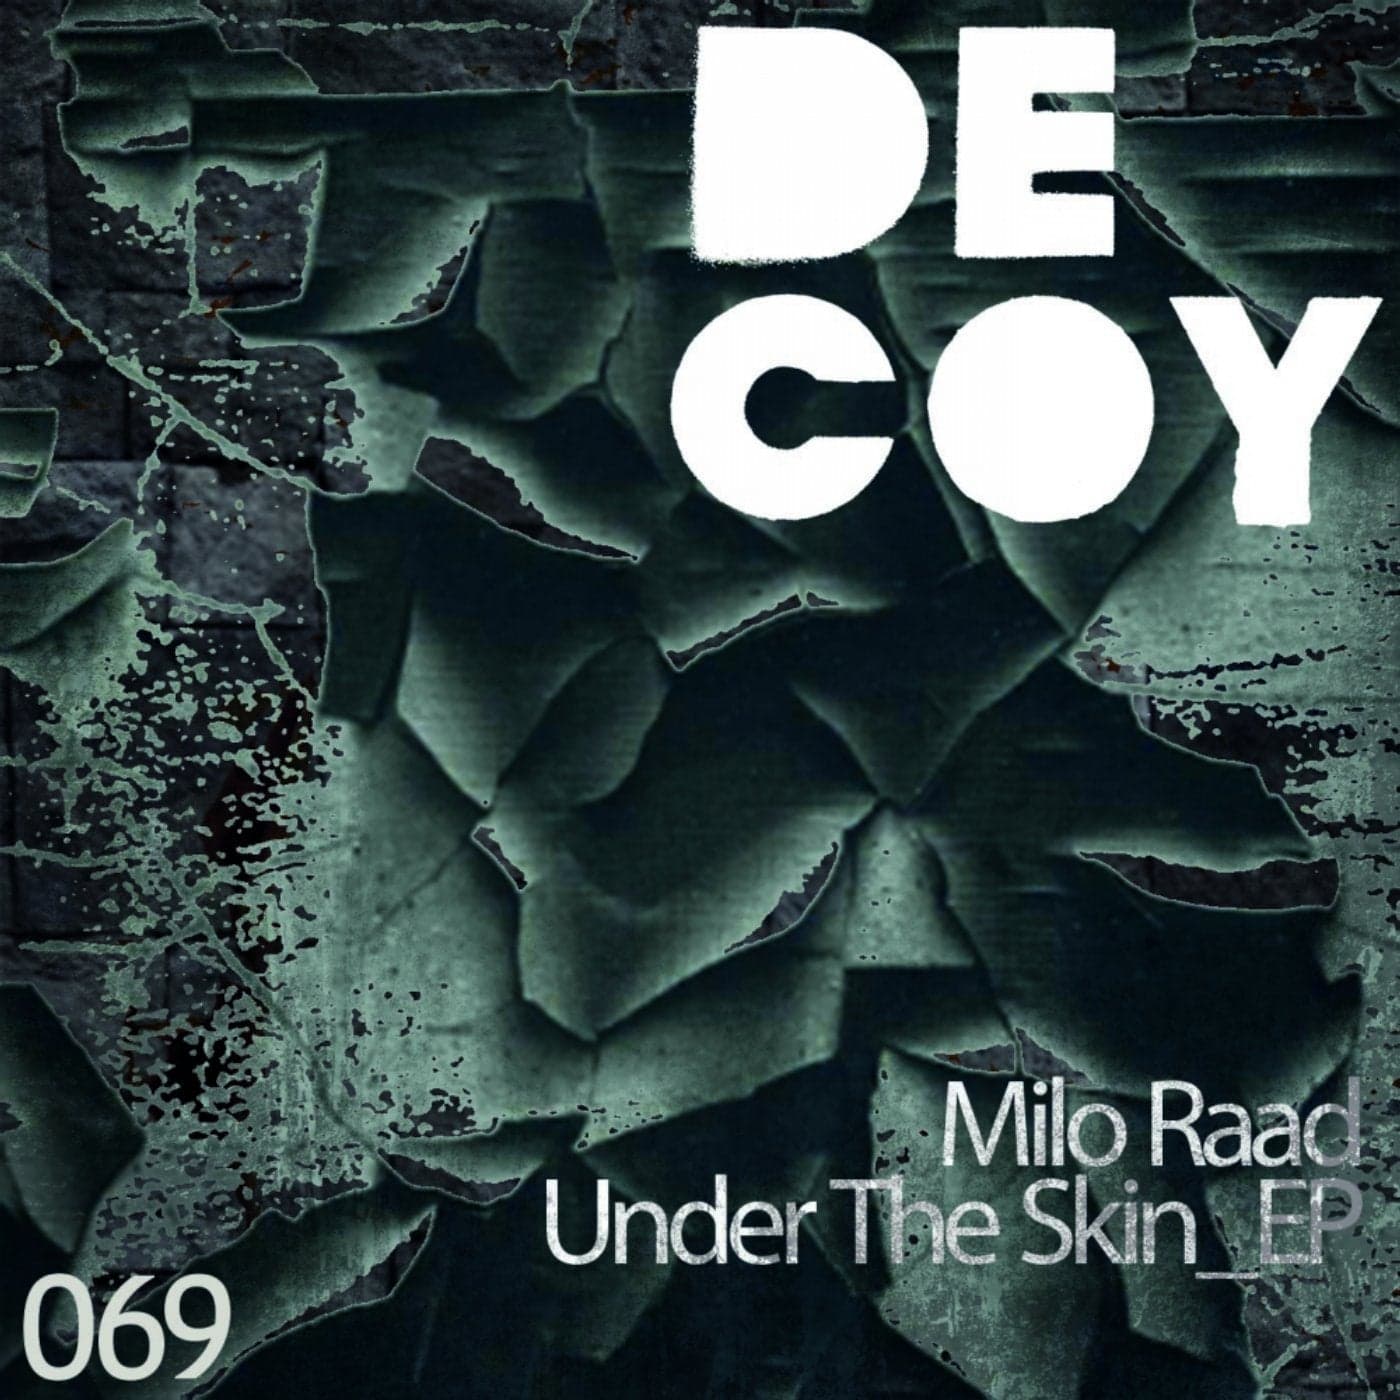 Download Milo Raad - Under The Skin EP on Electrobuzz